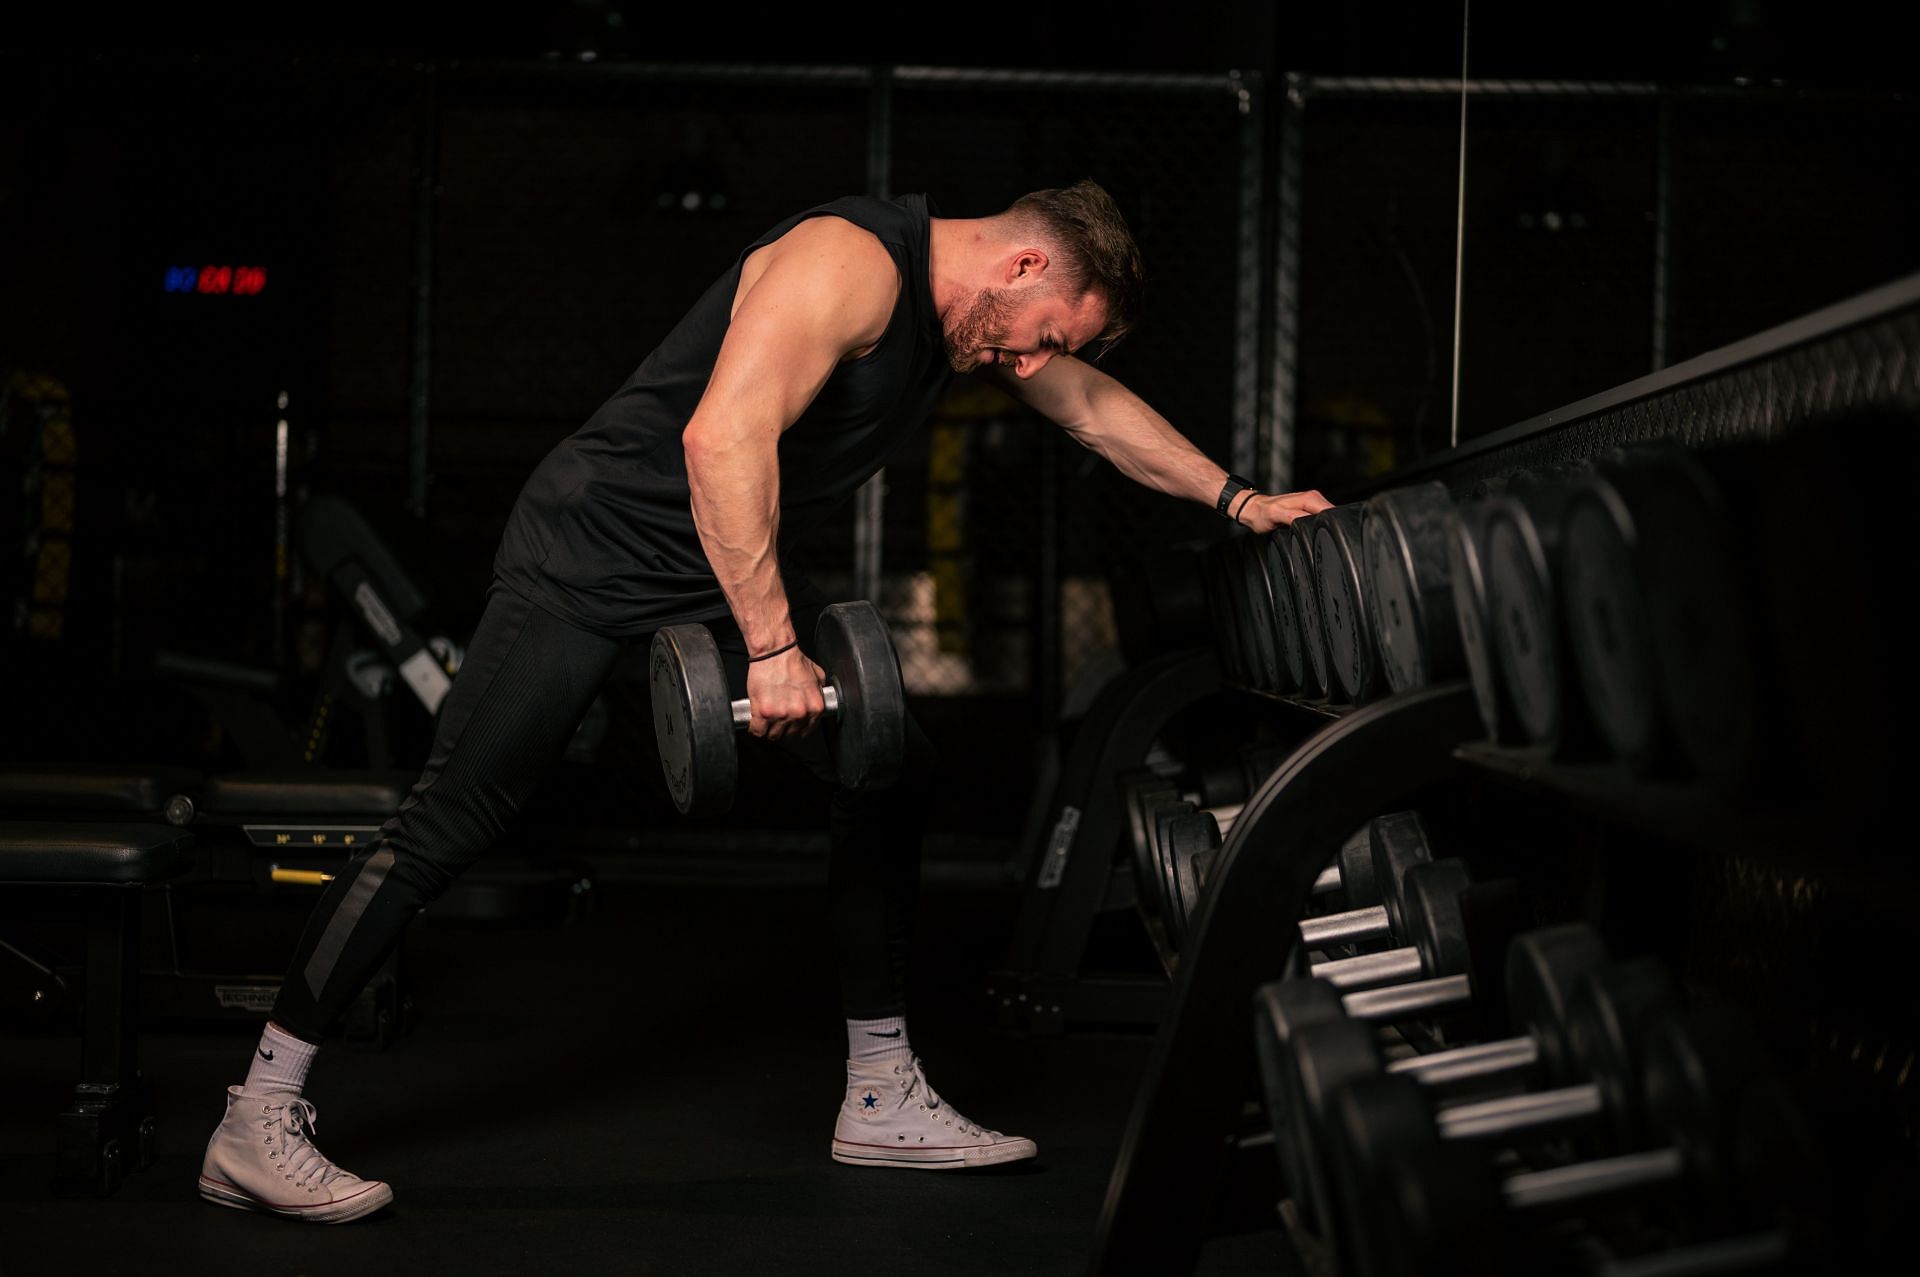 dumbbell exercises engage the glutes, and they also train many other muscles in the lower body including the core. (Image via Unsplash/ Bastien Plu)